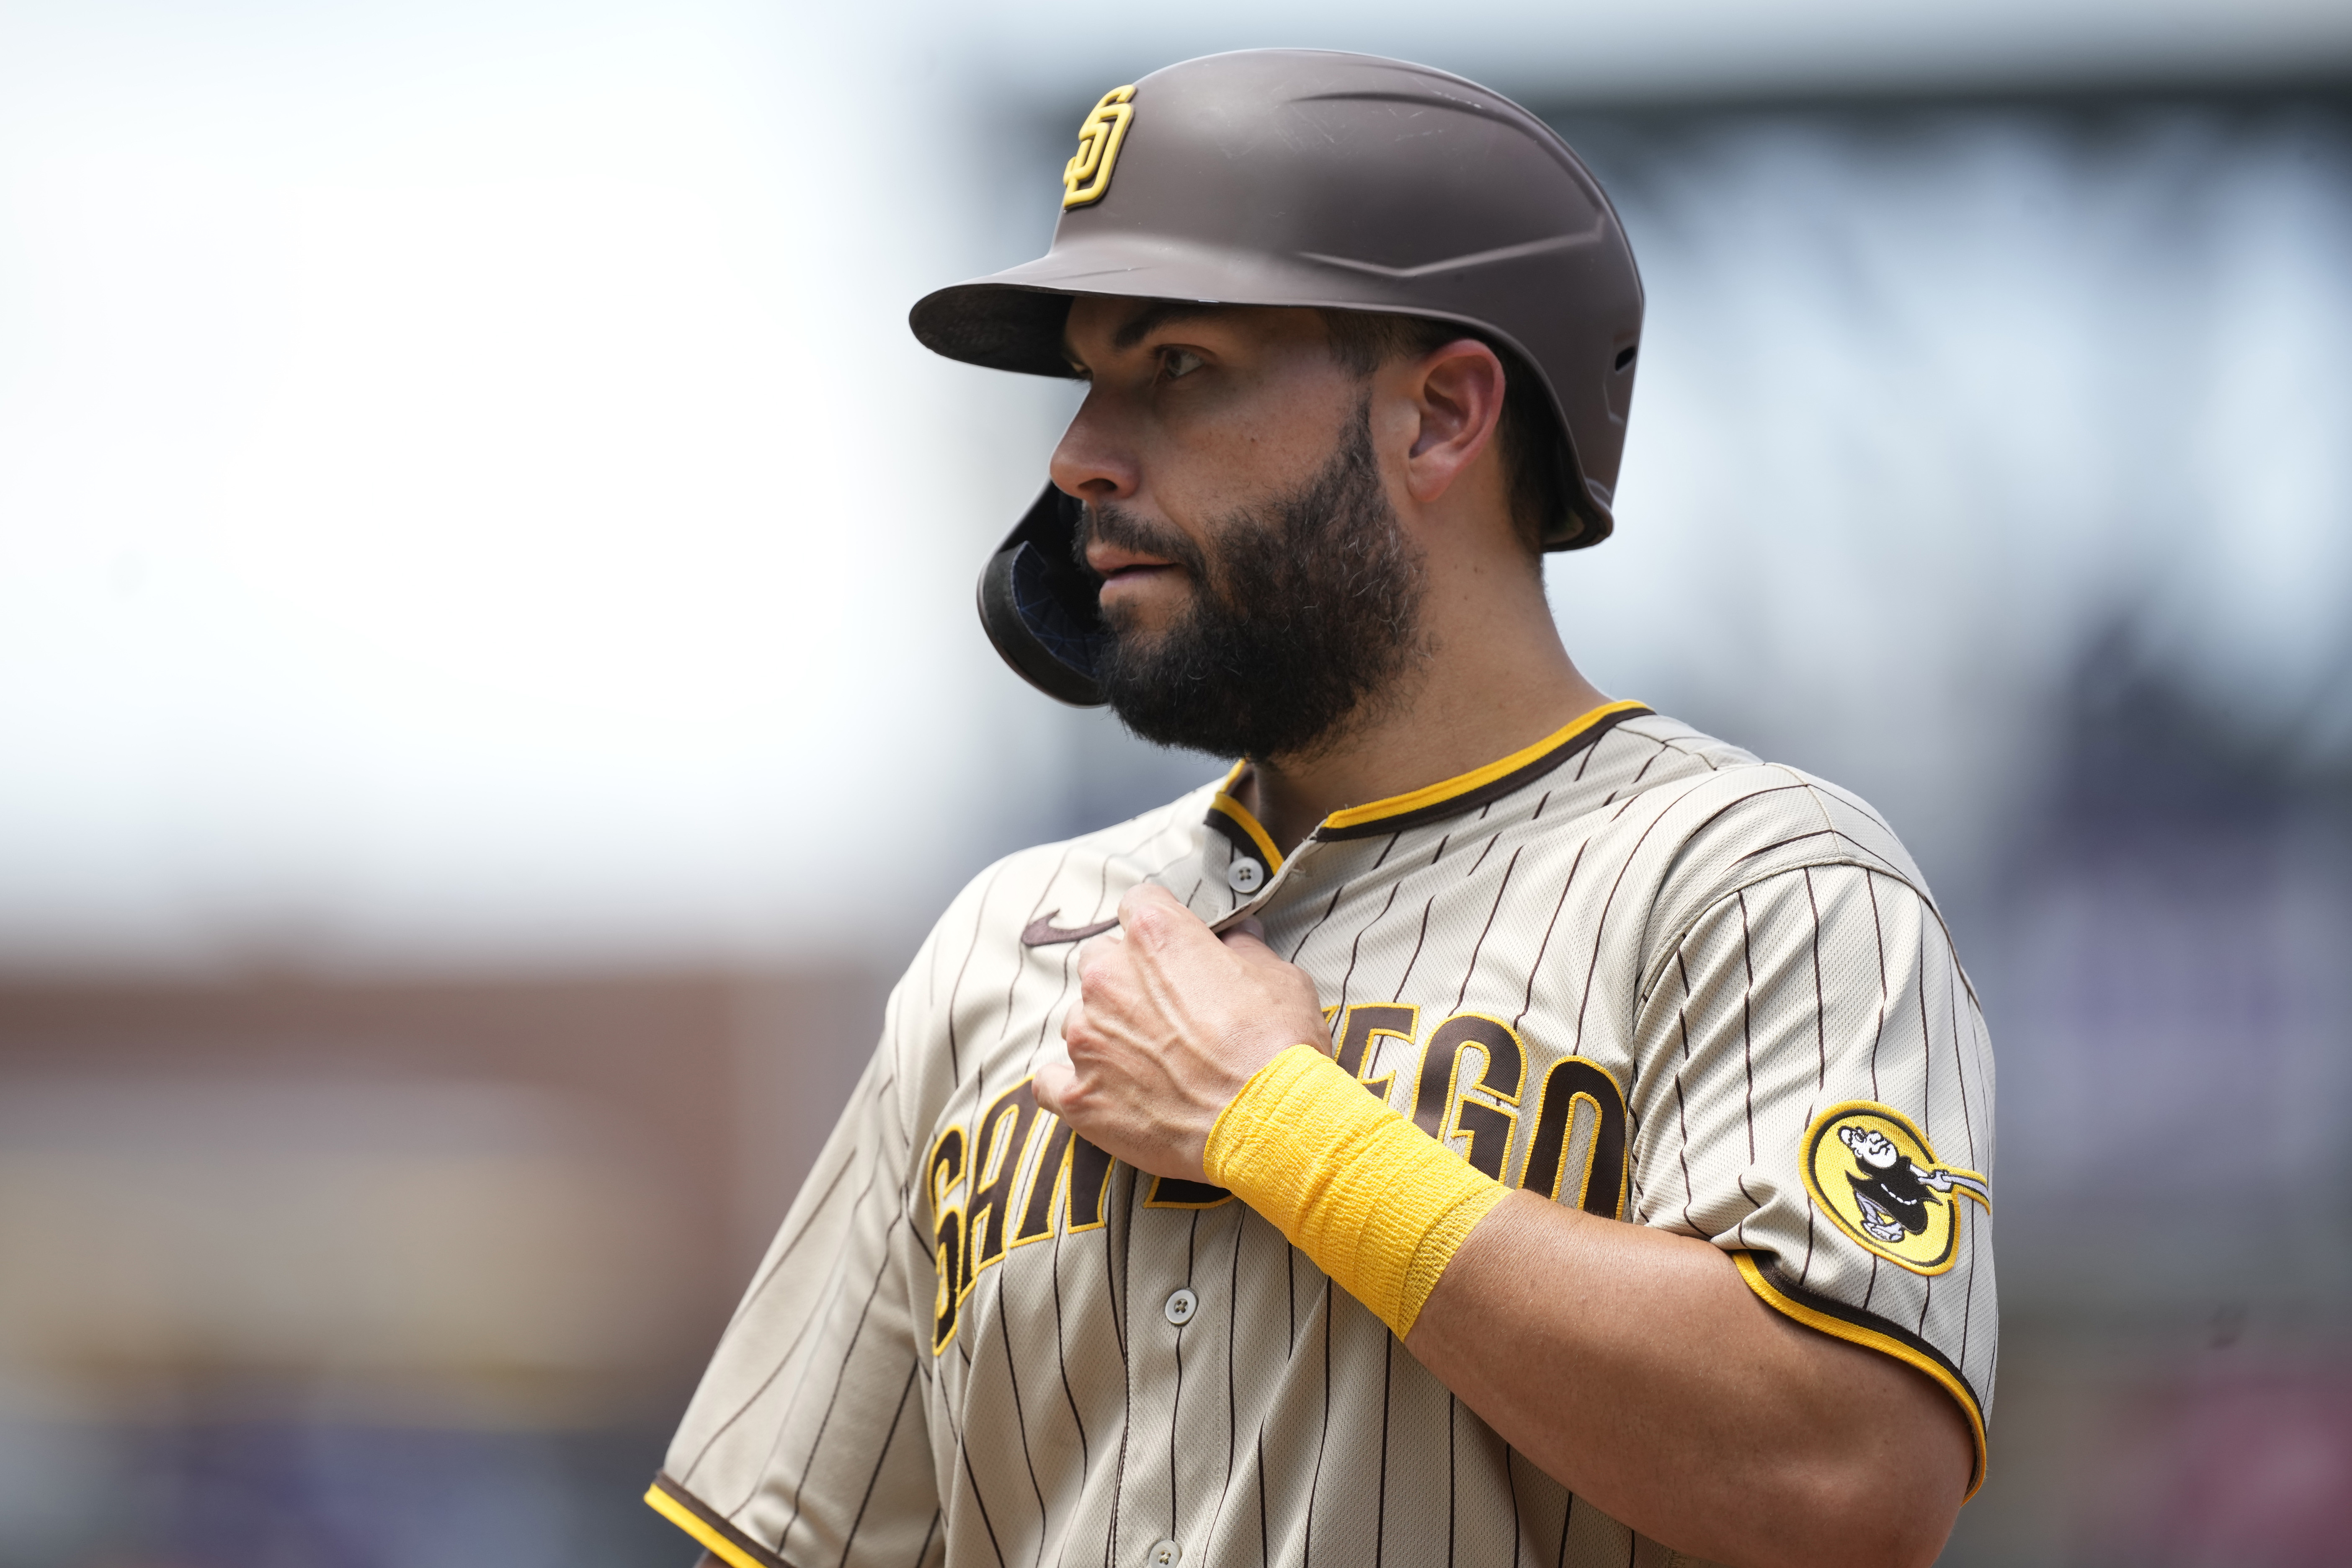 Red Sox paying Eric Hosmer minimum salary was Padres' offer: 'We